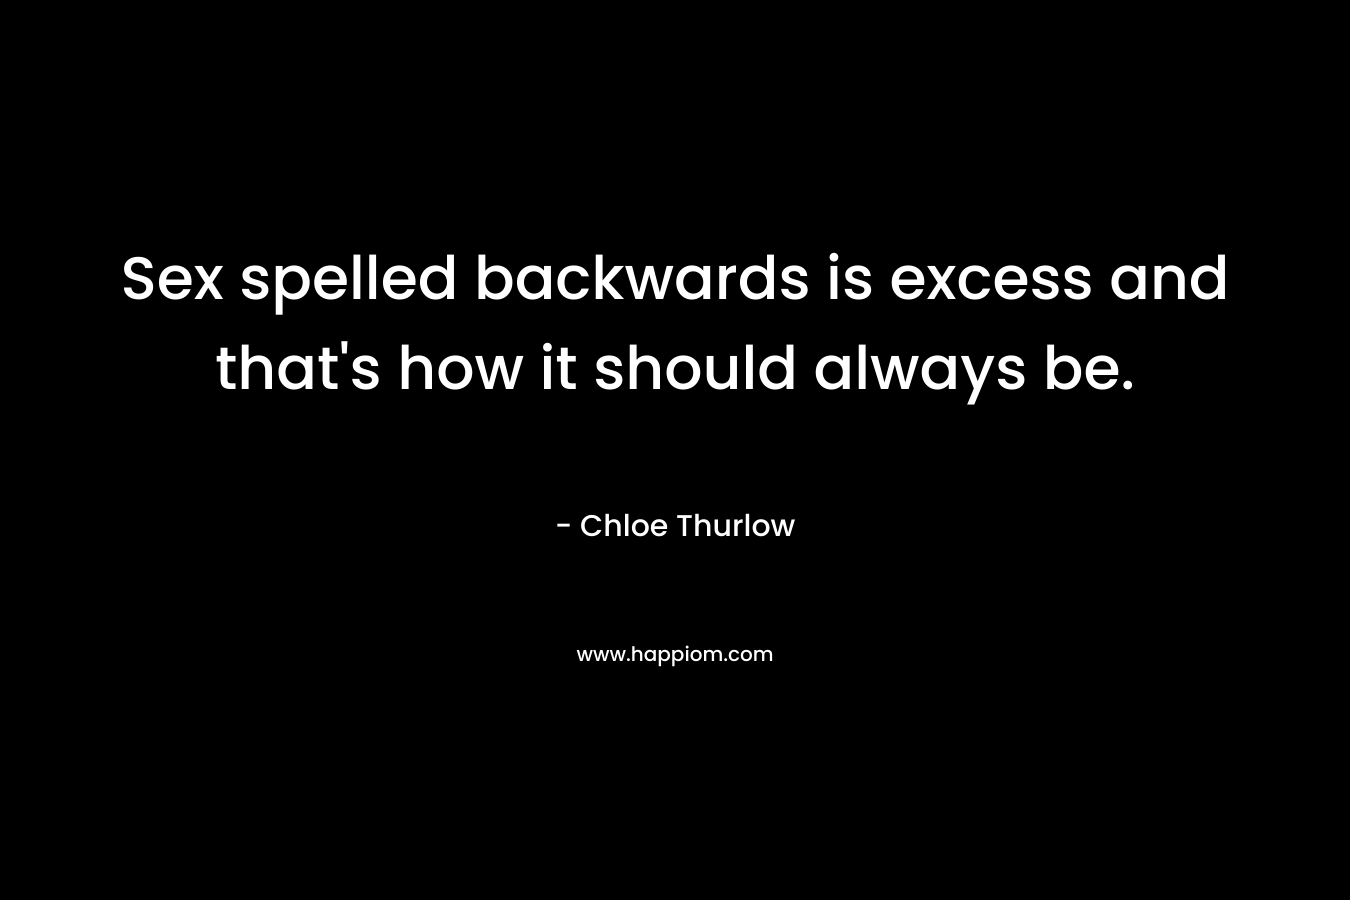 Sex spelled backwards is excess and that’s how it should always be. – Chloe Thurlow